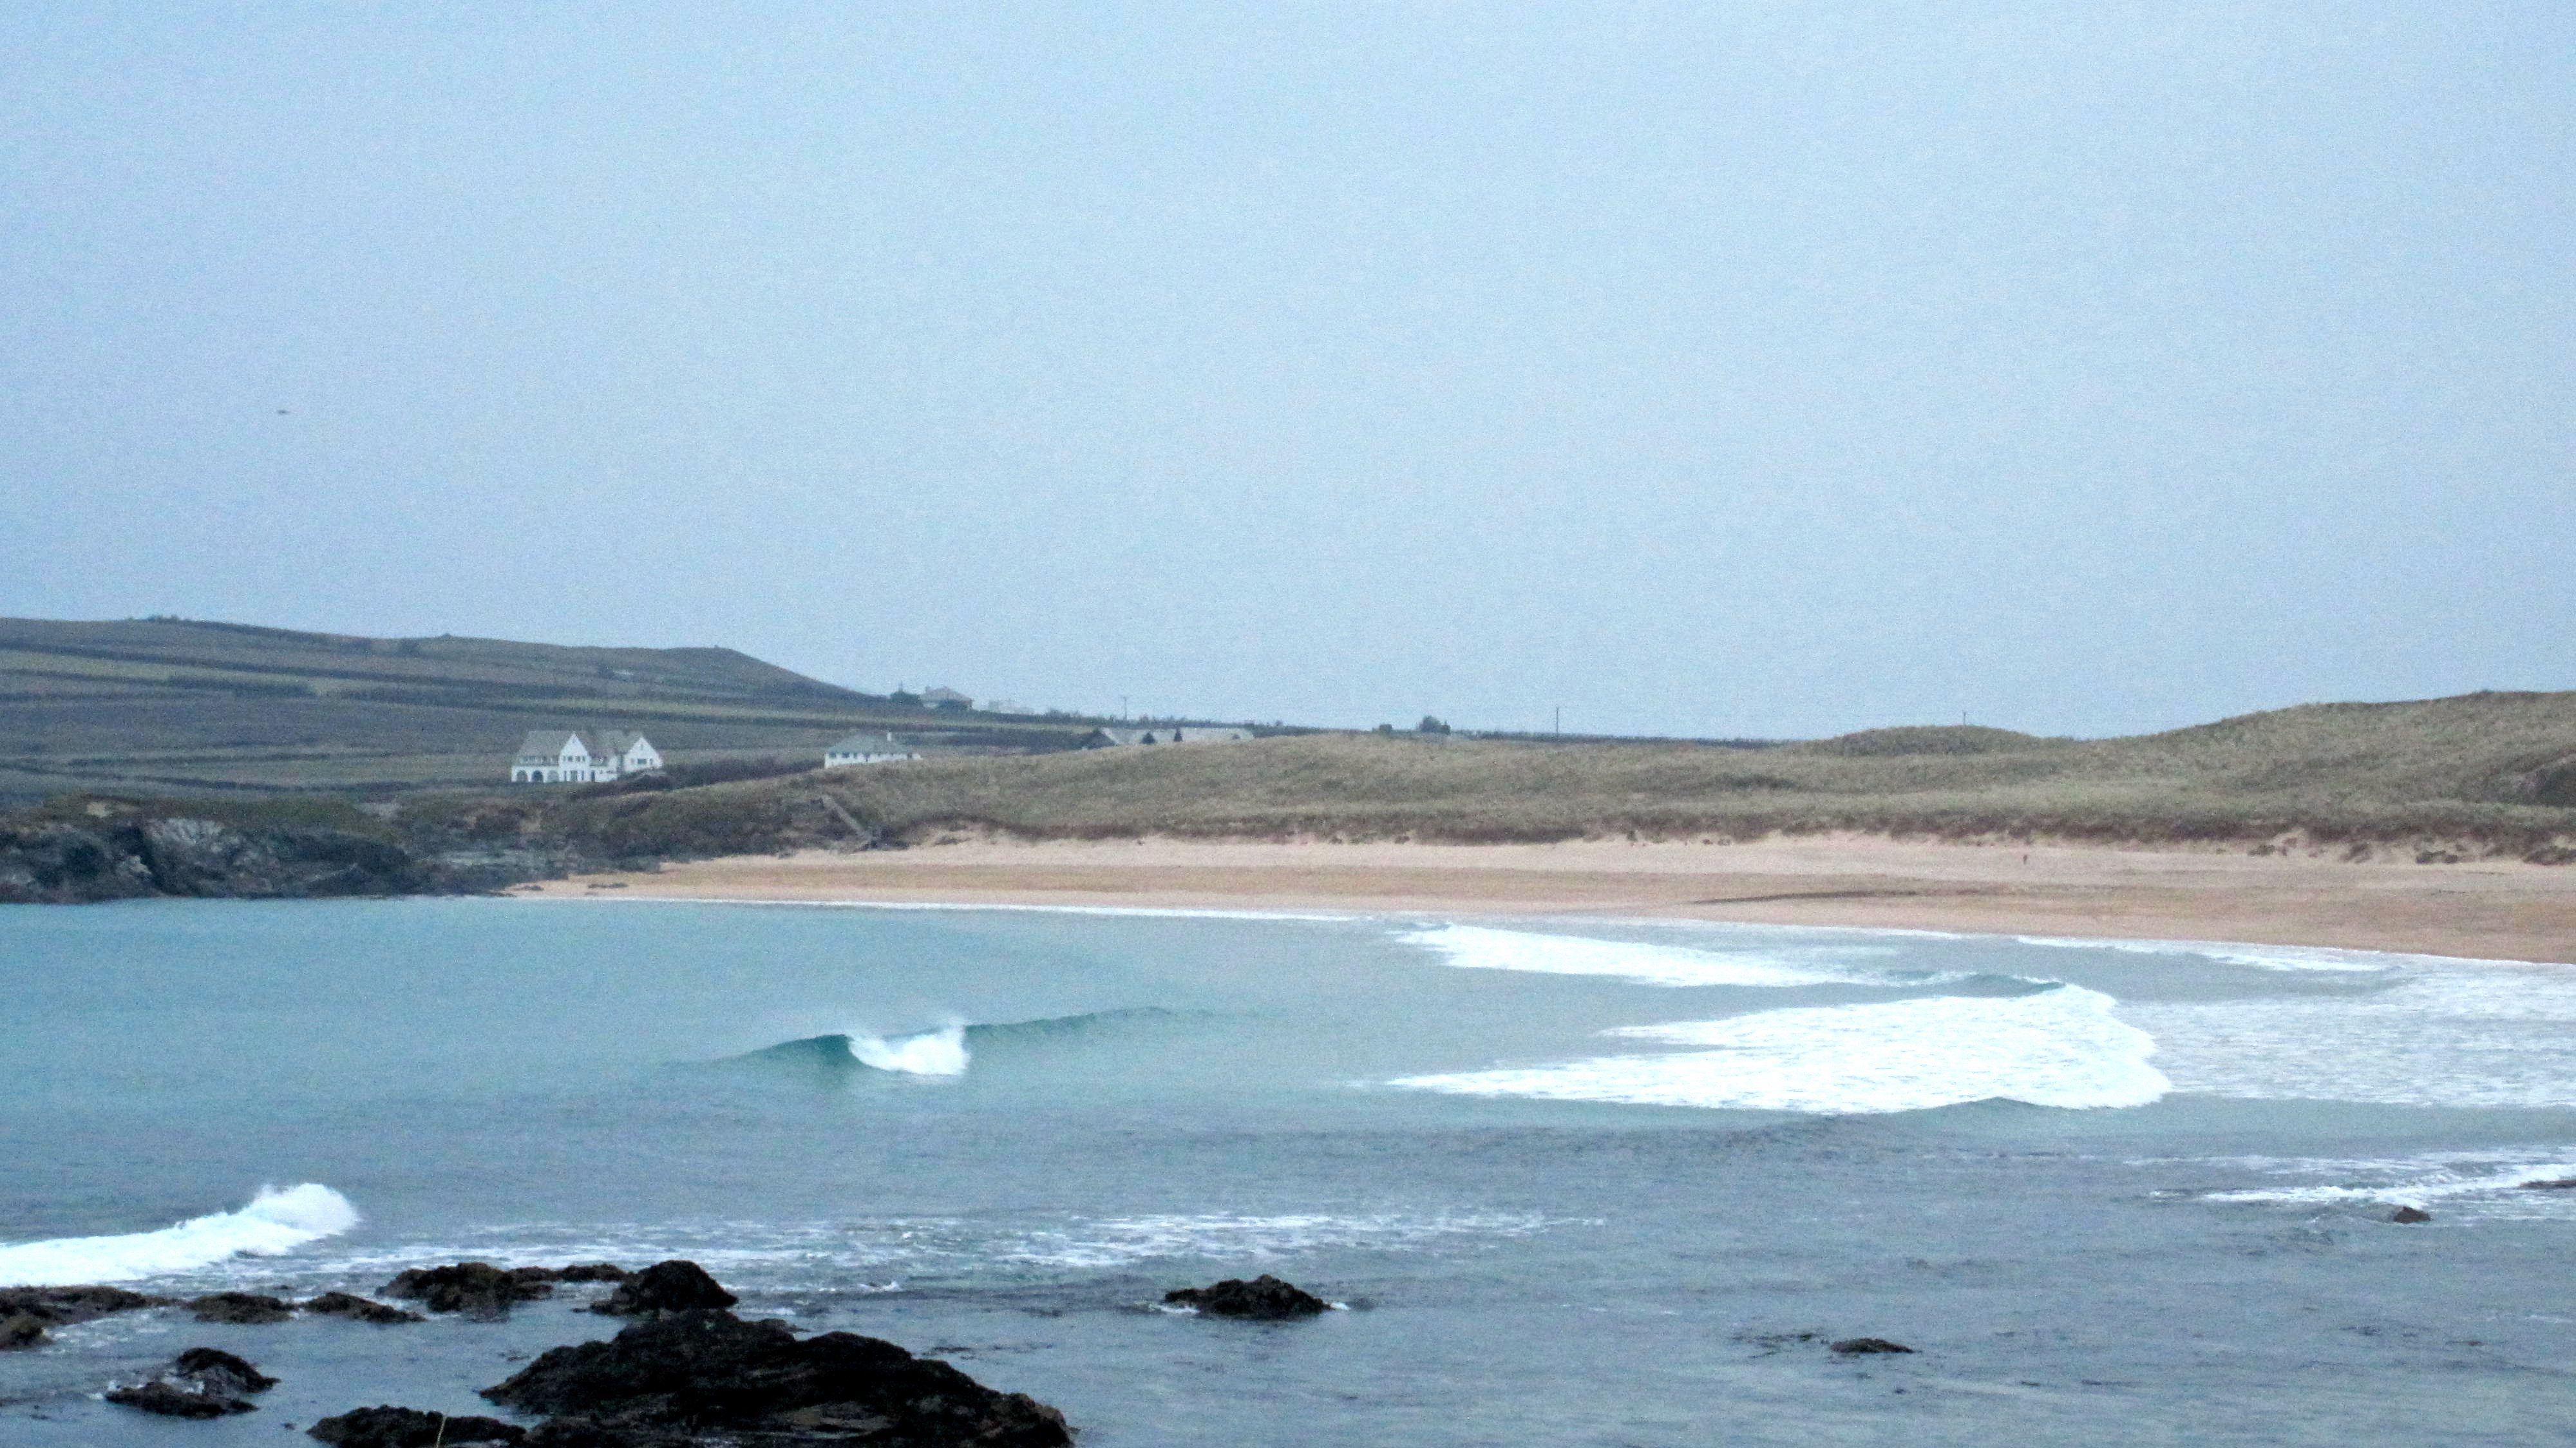 Surf Report for Wednesday 11th February 2015